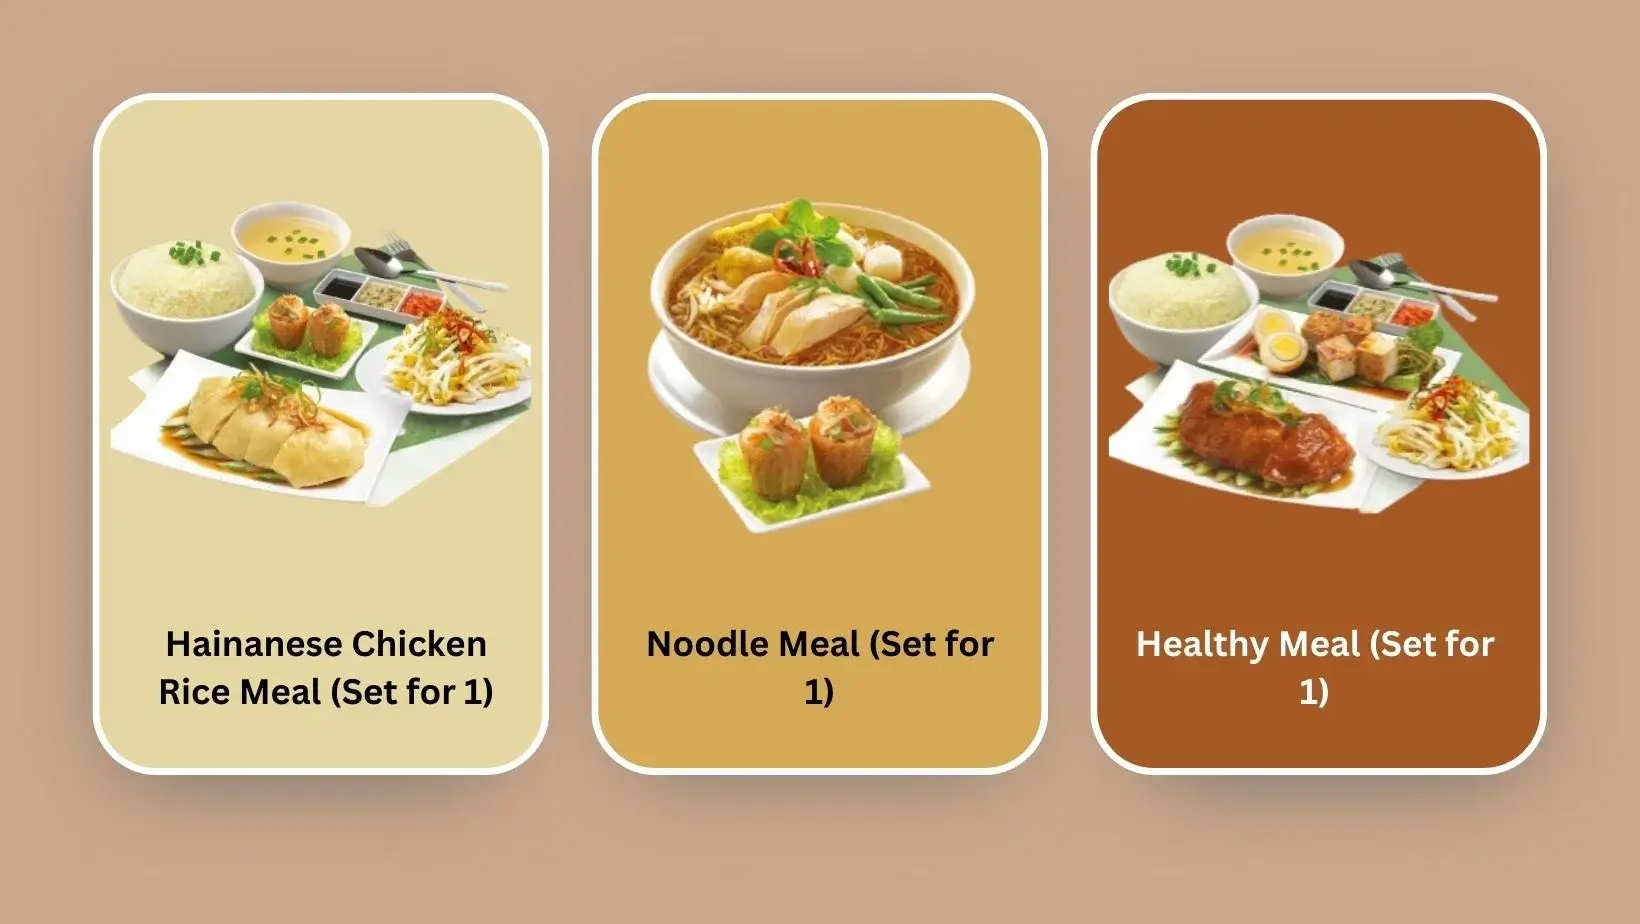 Noodle Meal (Set for 1), Healthy Meal (Set for 1), Hainanese Chicken Rice Meal (Set for 1) at menu in The chicken Rice Shop Malaysia